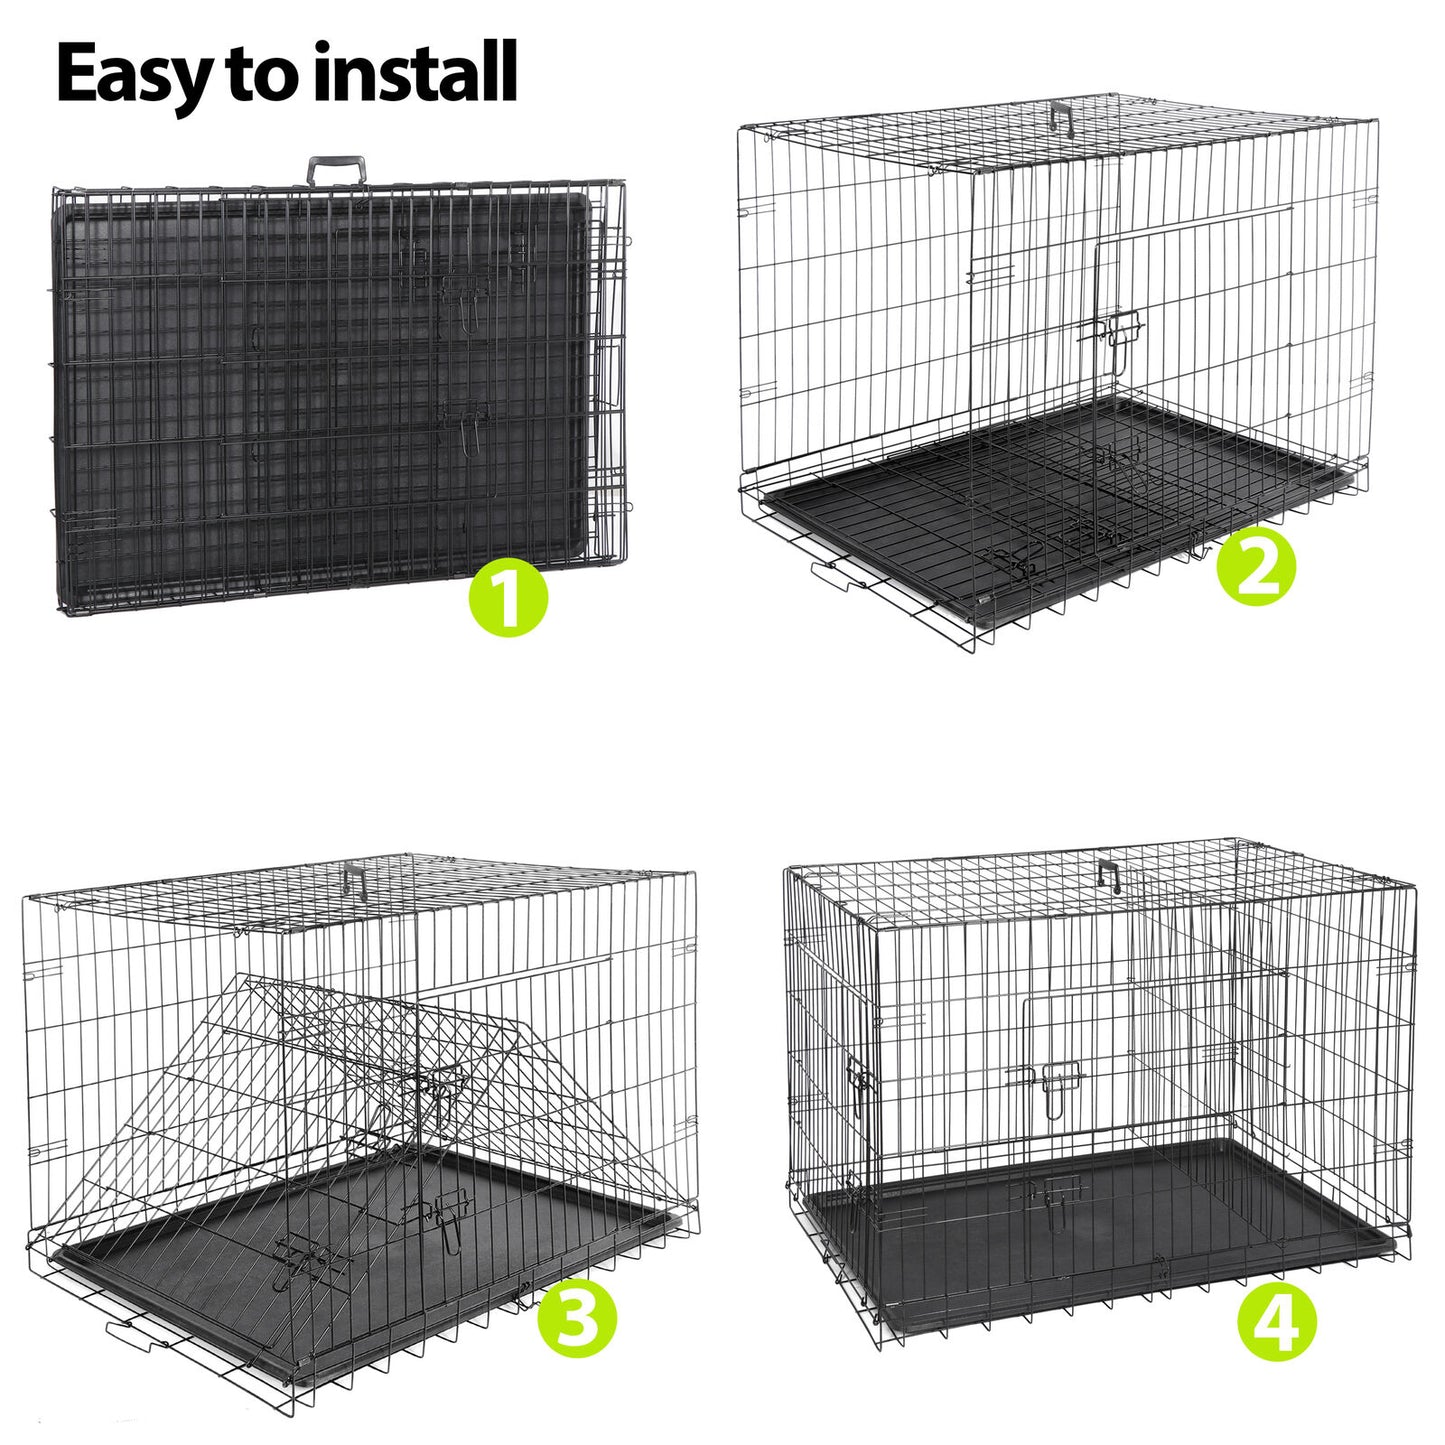 42" Dog Crate Kennel Folding Metal Pet Cage 2 Door With Tray Pan Black